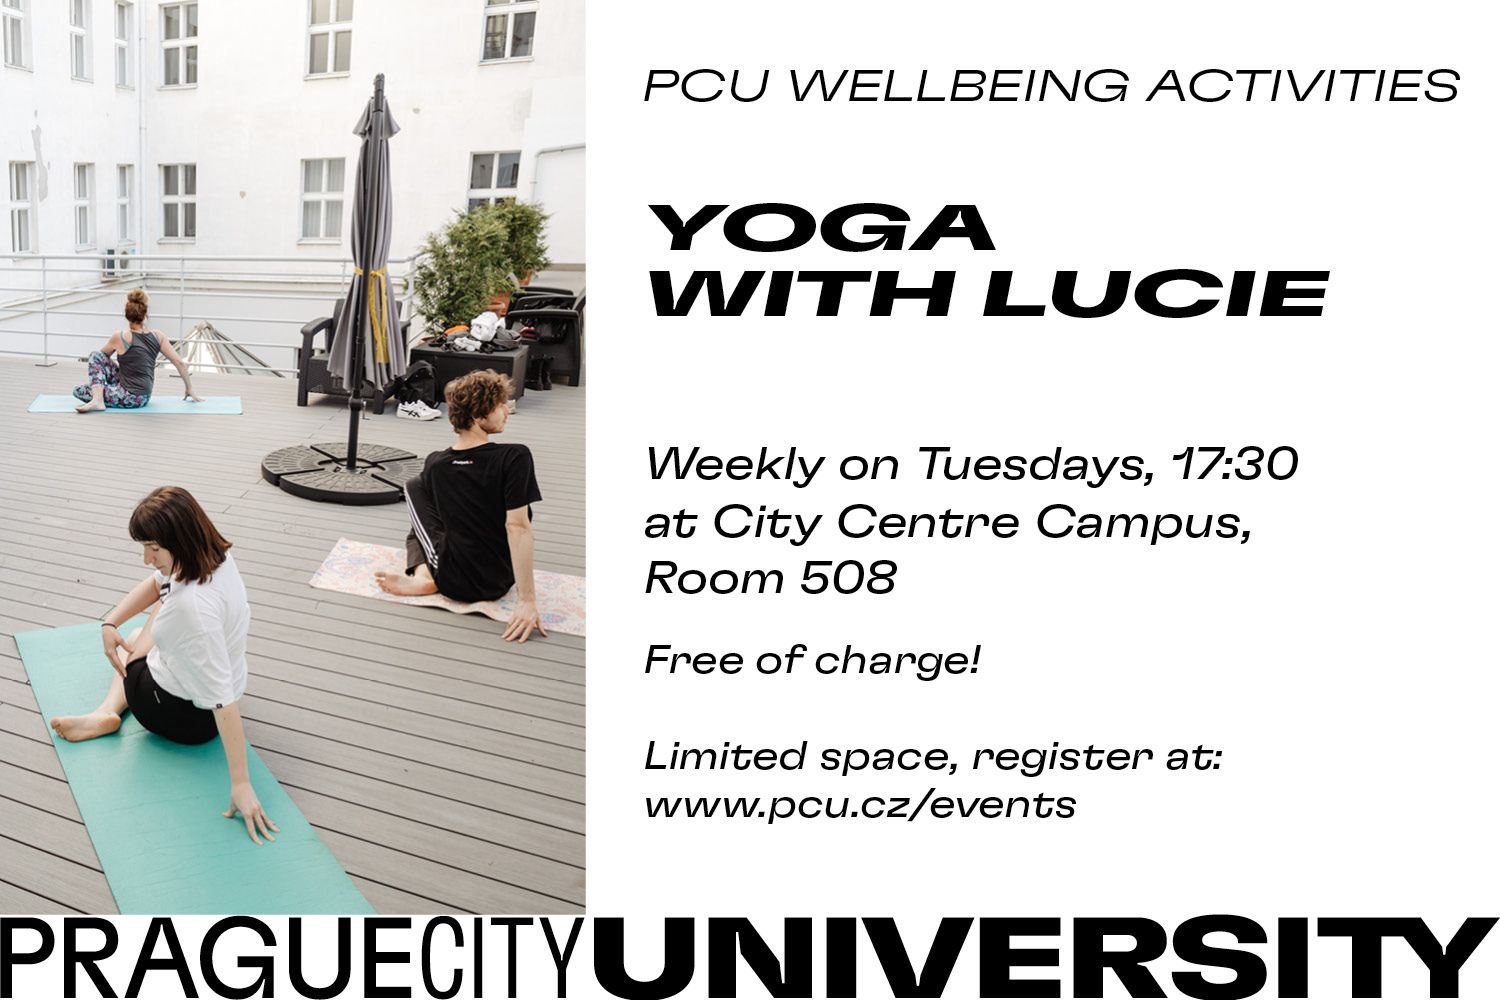 Yoga with Lucie every Tuesday